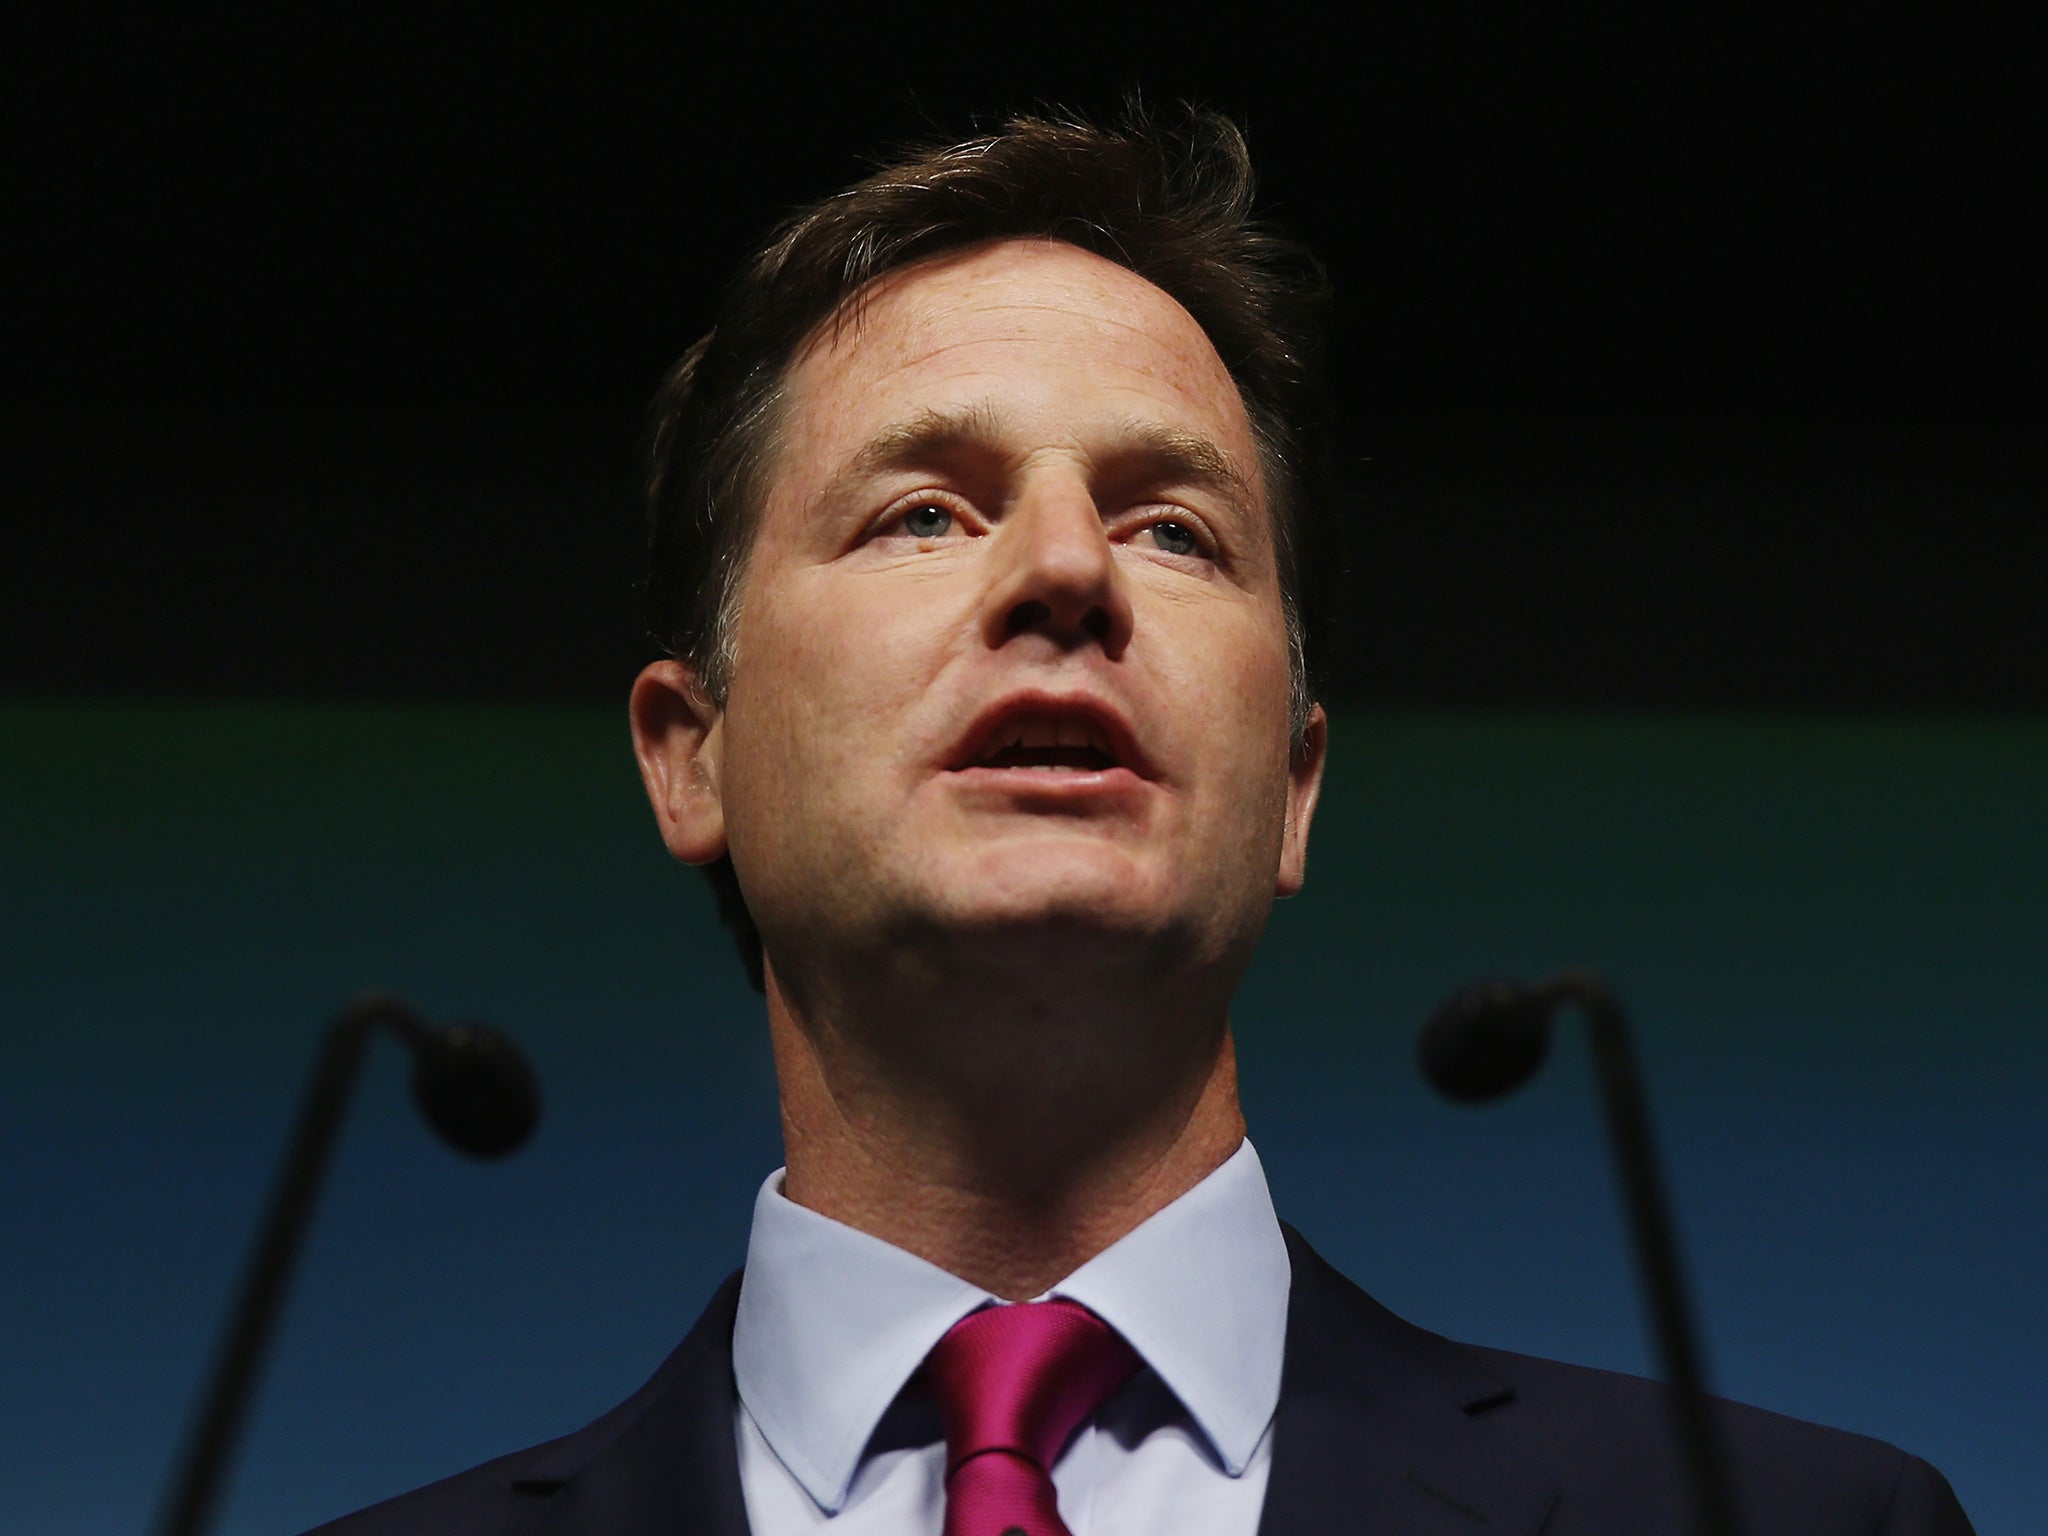 Nick Clegg said the rights of consumers, businesses and journalists must be protected in the online world